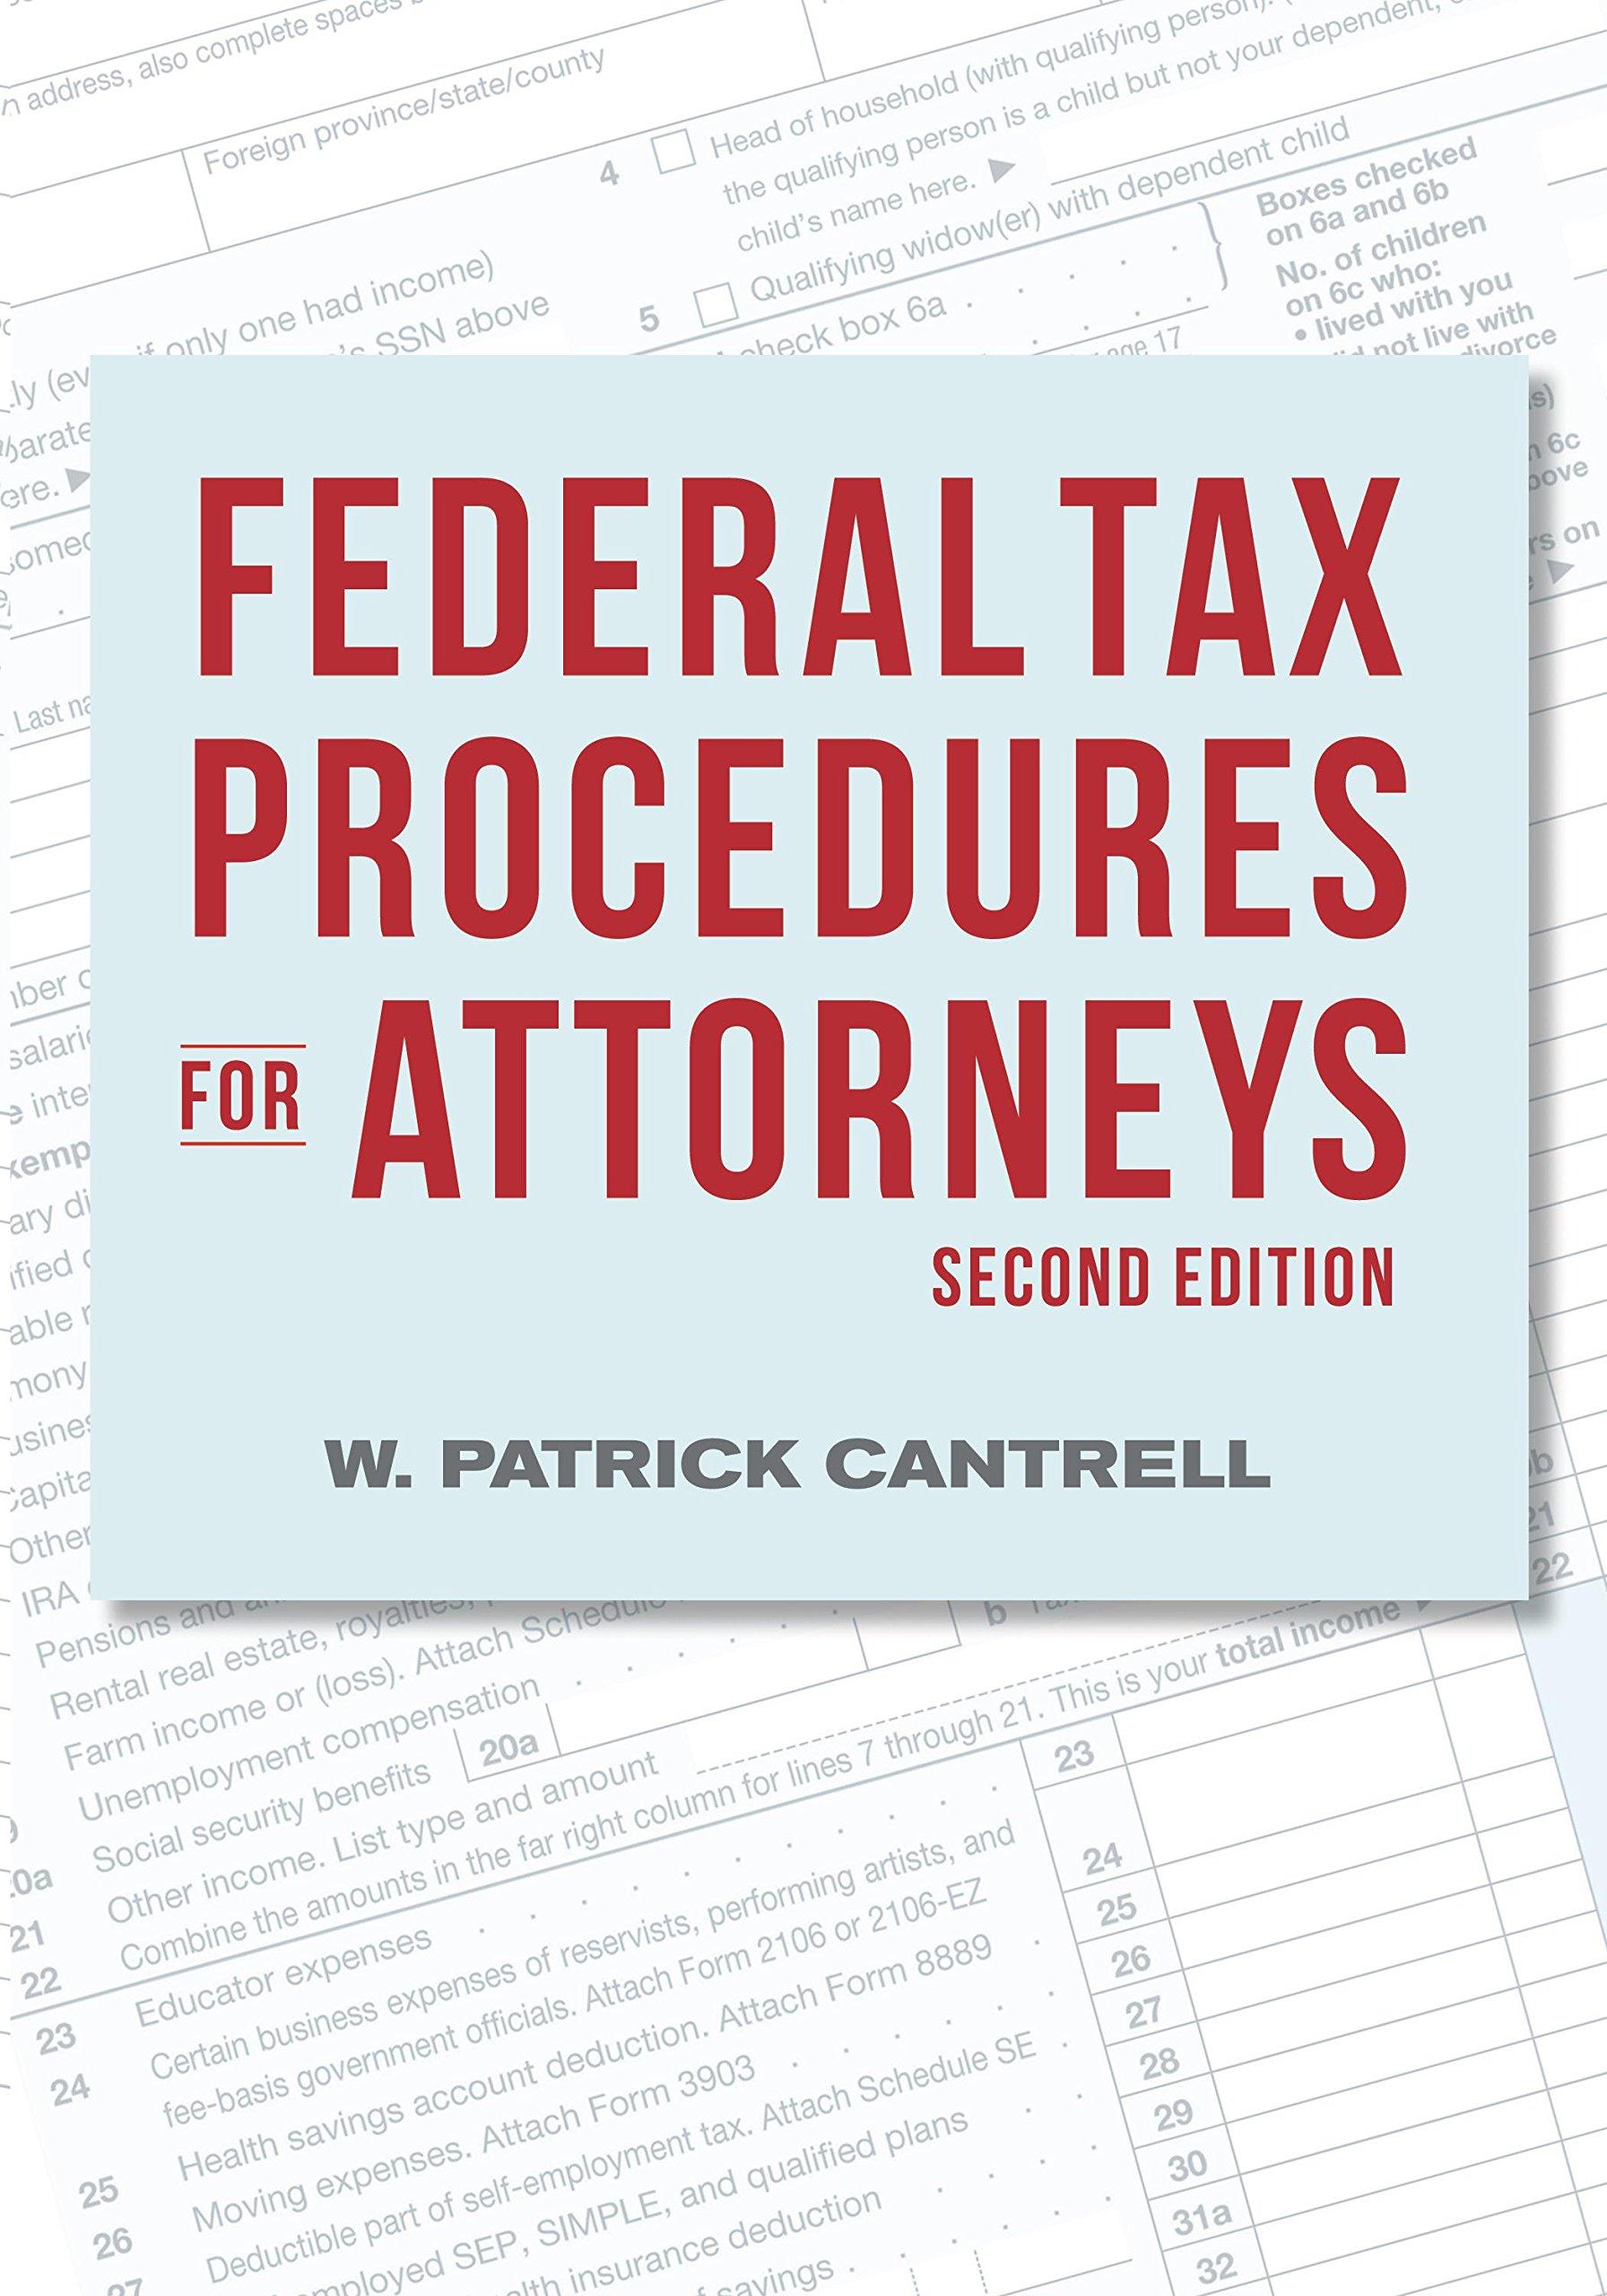 federal tax procedures for attorneys 2nd edition w. patrick cantrell 1634252594, 9781634252591